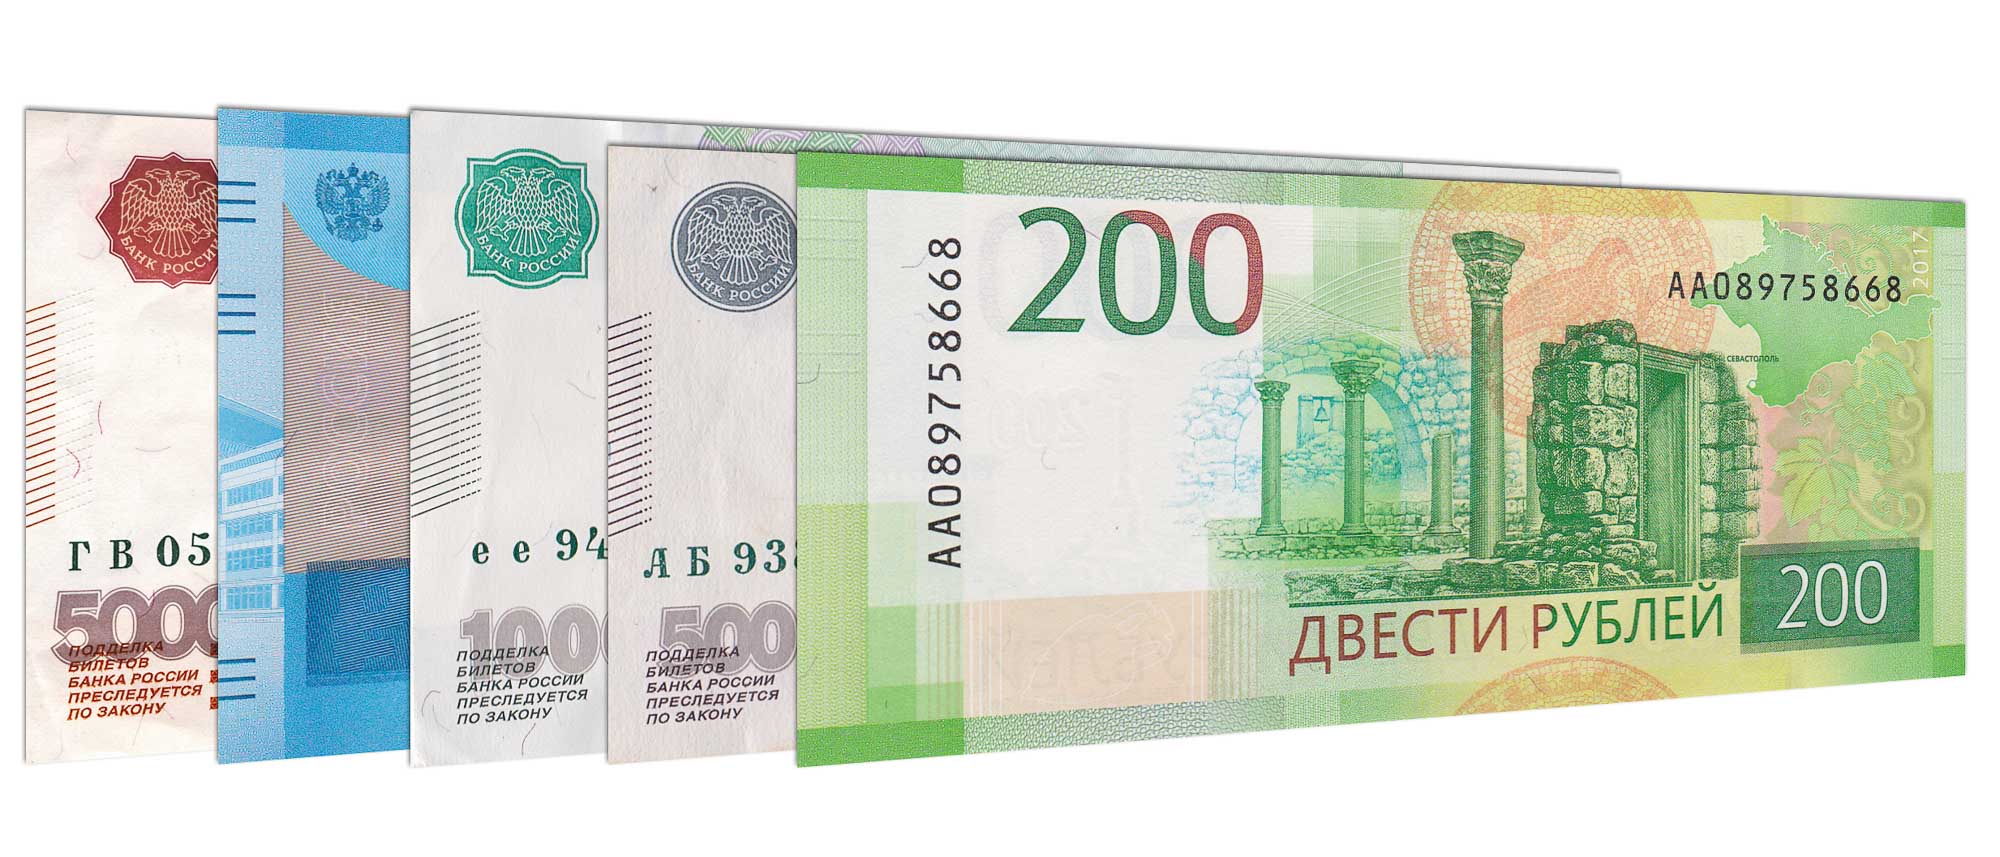 current-russian-ruble-banknotes-v2.jpg